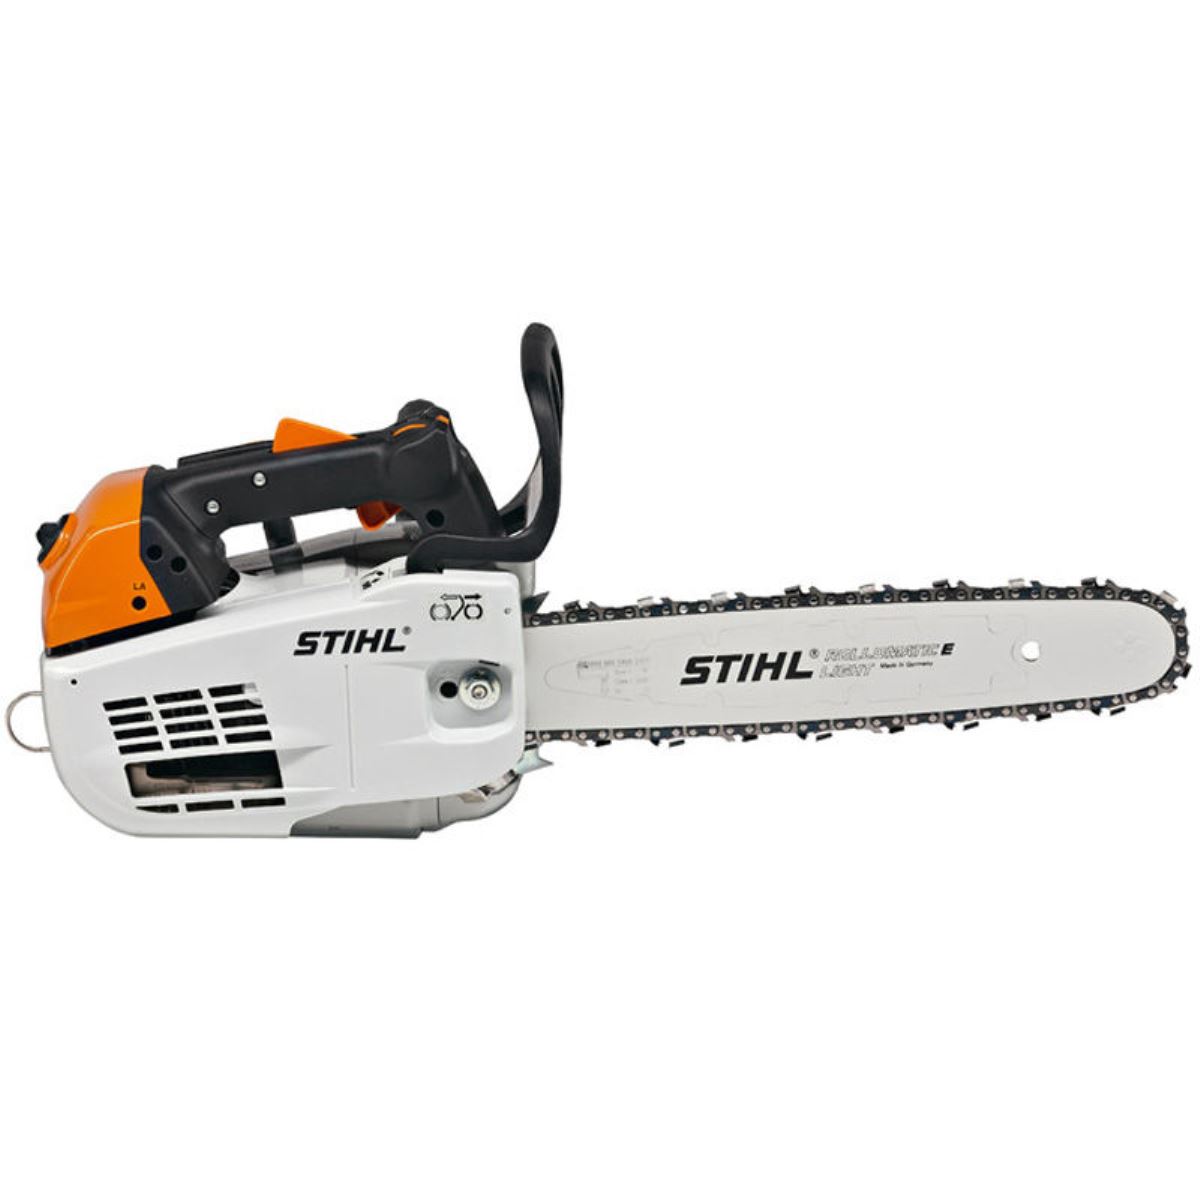 STIHL MS 201 T Chainsaw for Professional Arborists